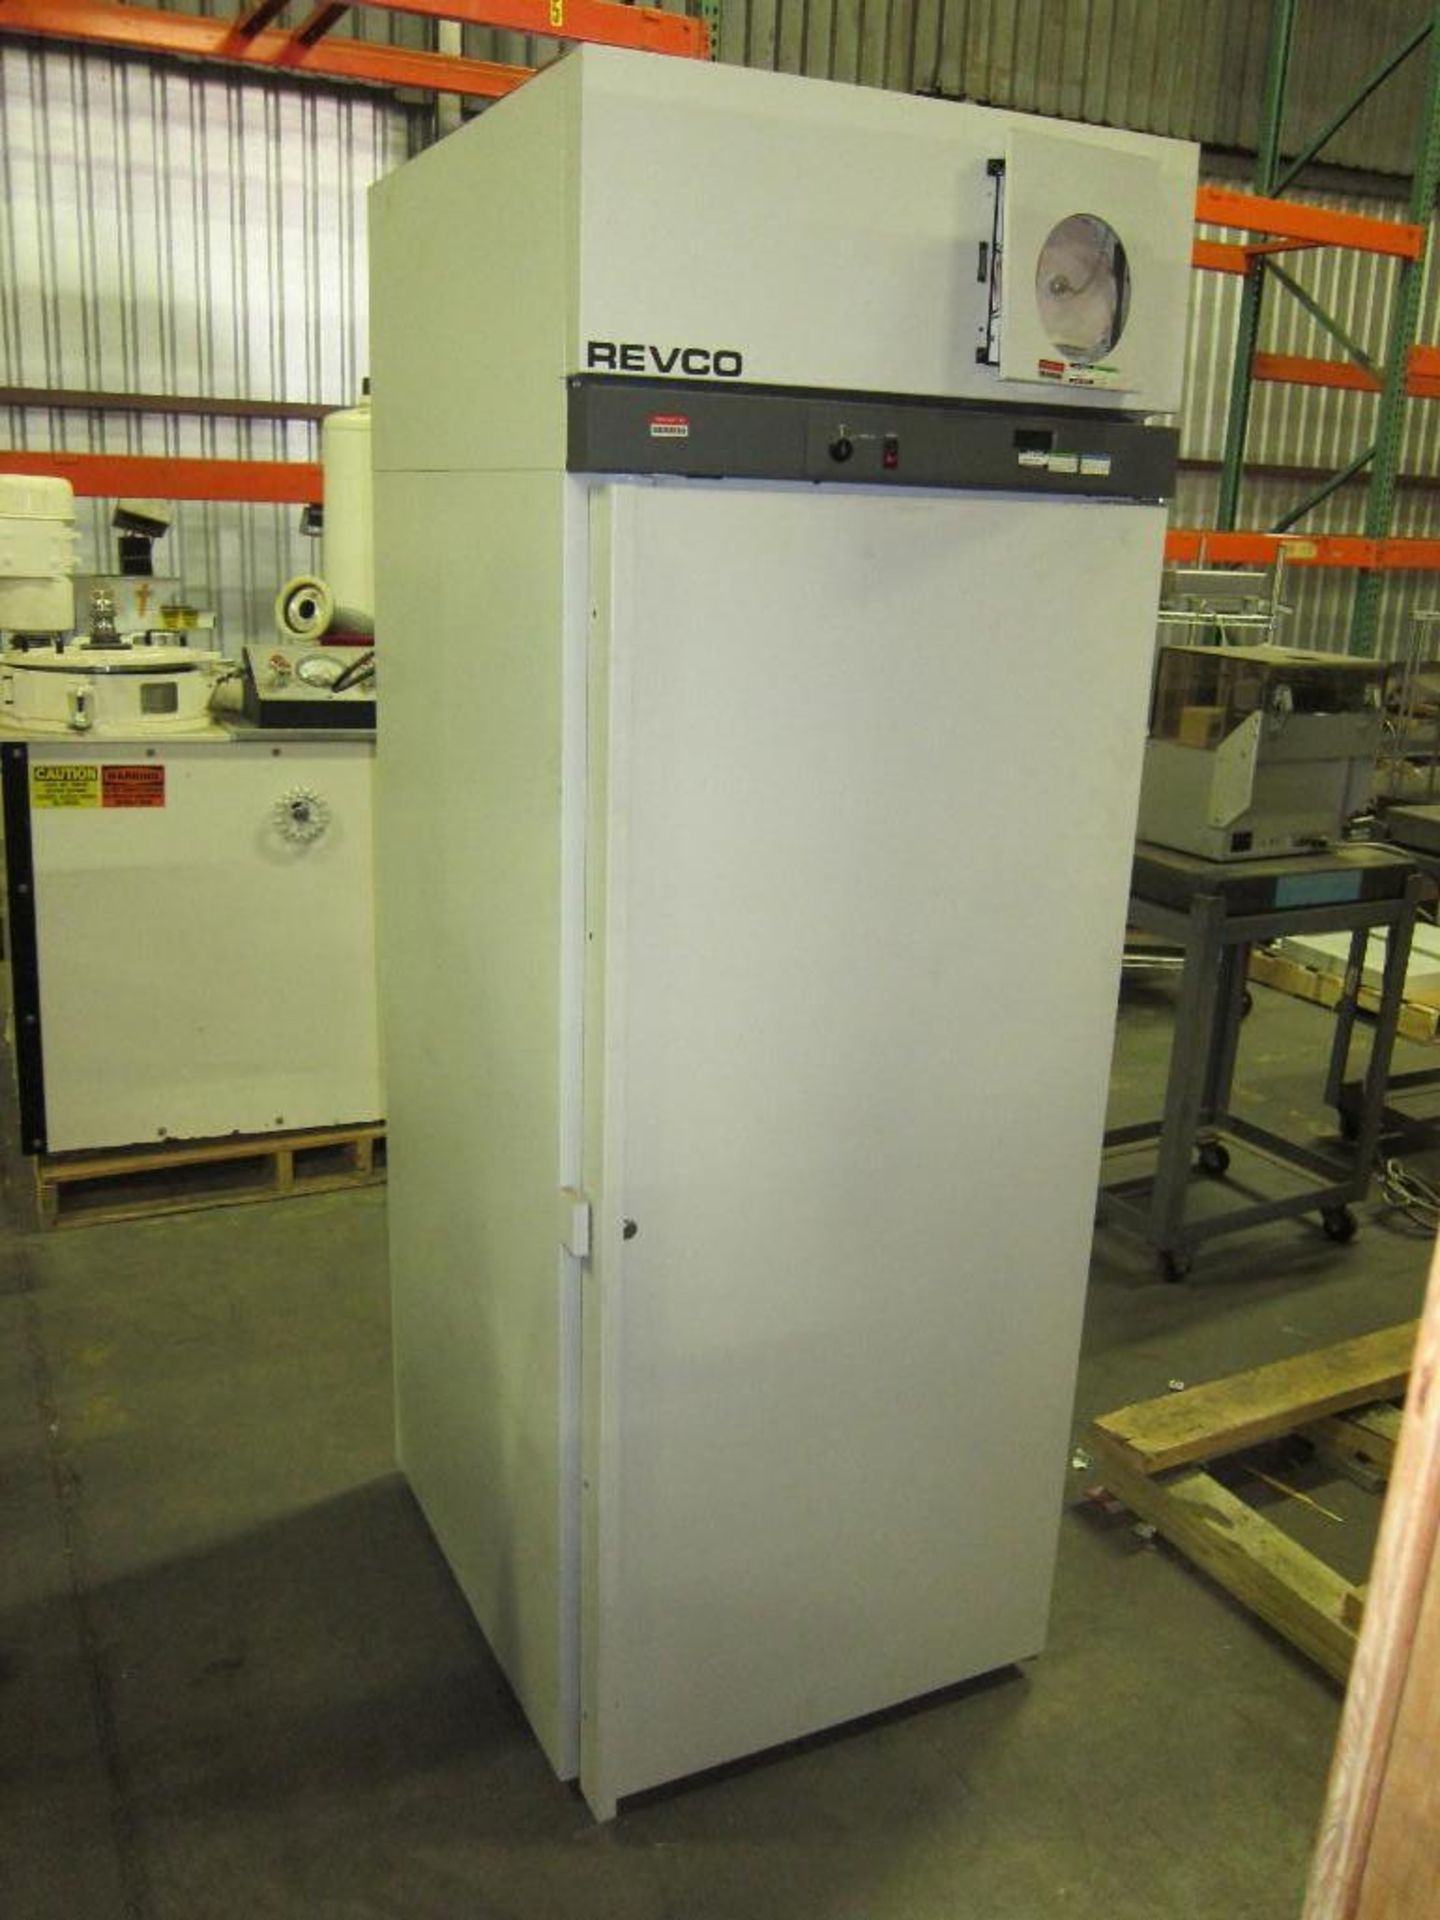 Revco Refrigerator with Chart Recorder